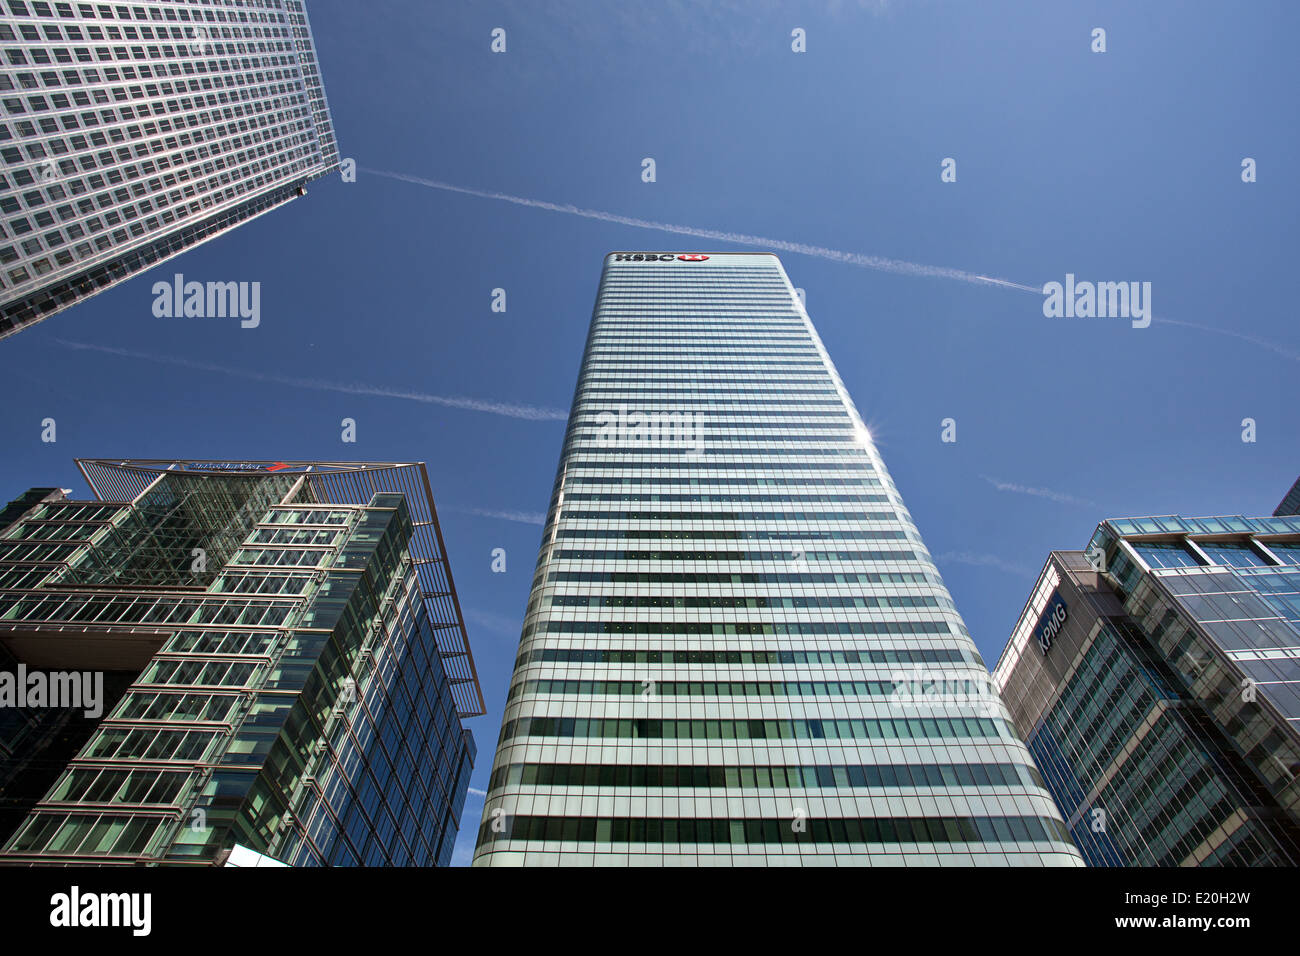 Canary Wharf district of London. Financial district. Stock Photo